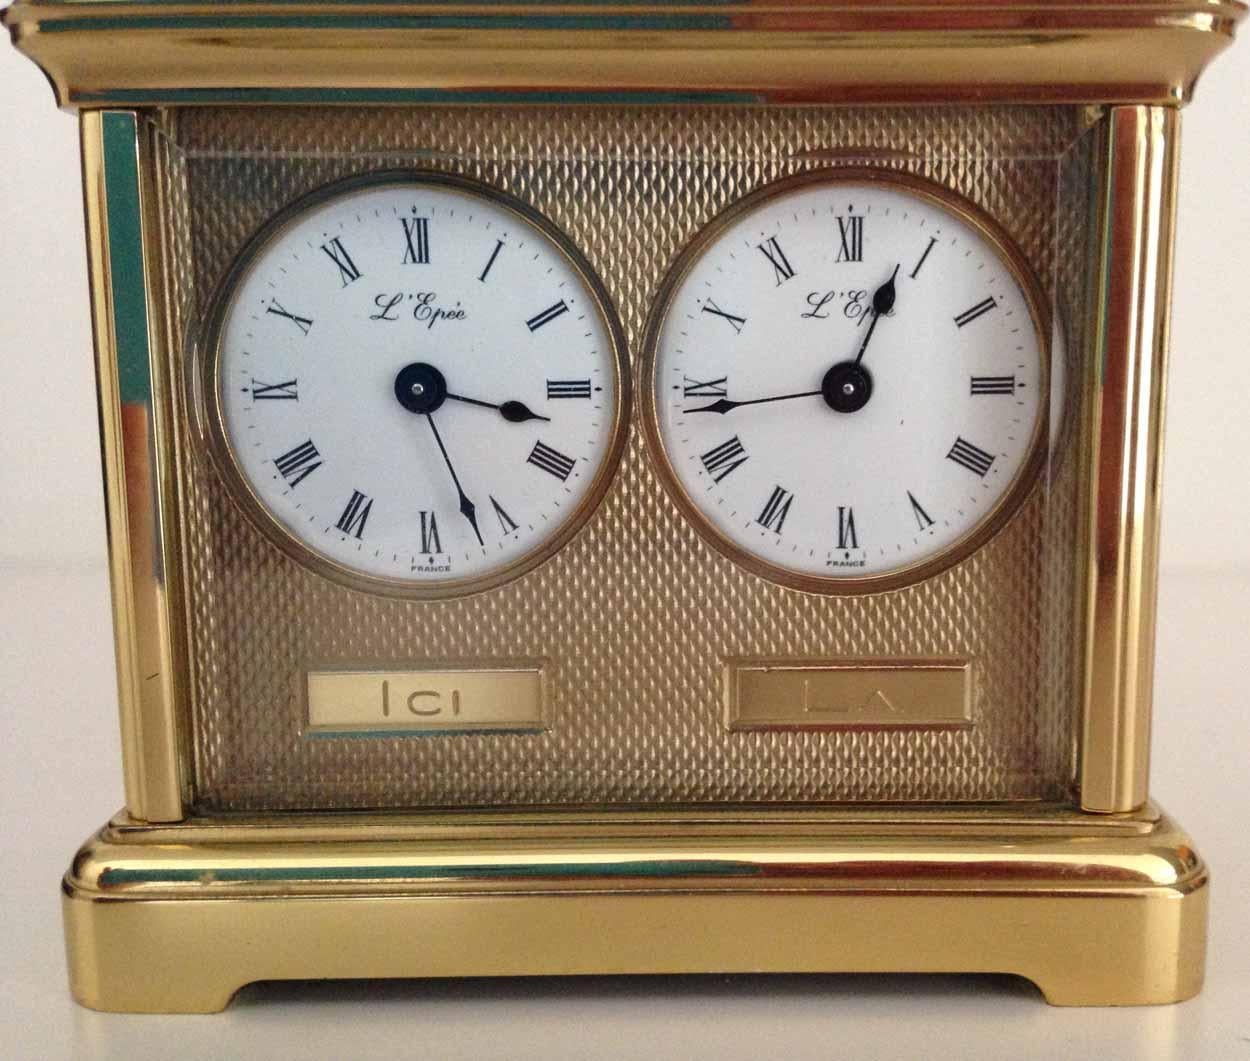 L'Epee Swiss miniature dual timezone carriage clock, circa 1970s.
The white enamel dials with Roman numerals and spade hands, the gilt brass case with glass sides and top, hinged handle

The small size of the clock with dual faces was designed